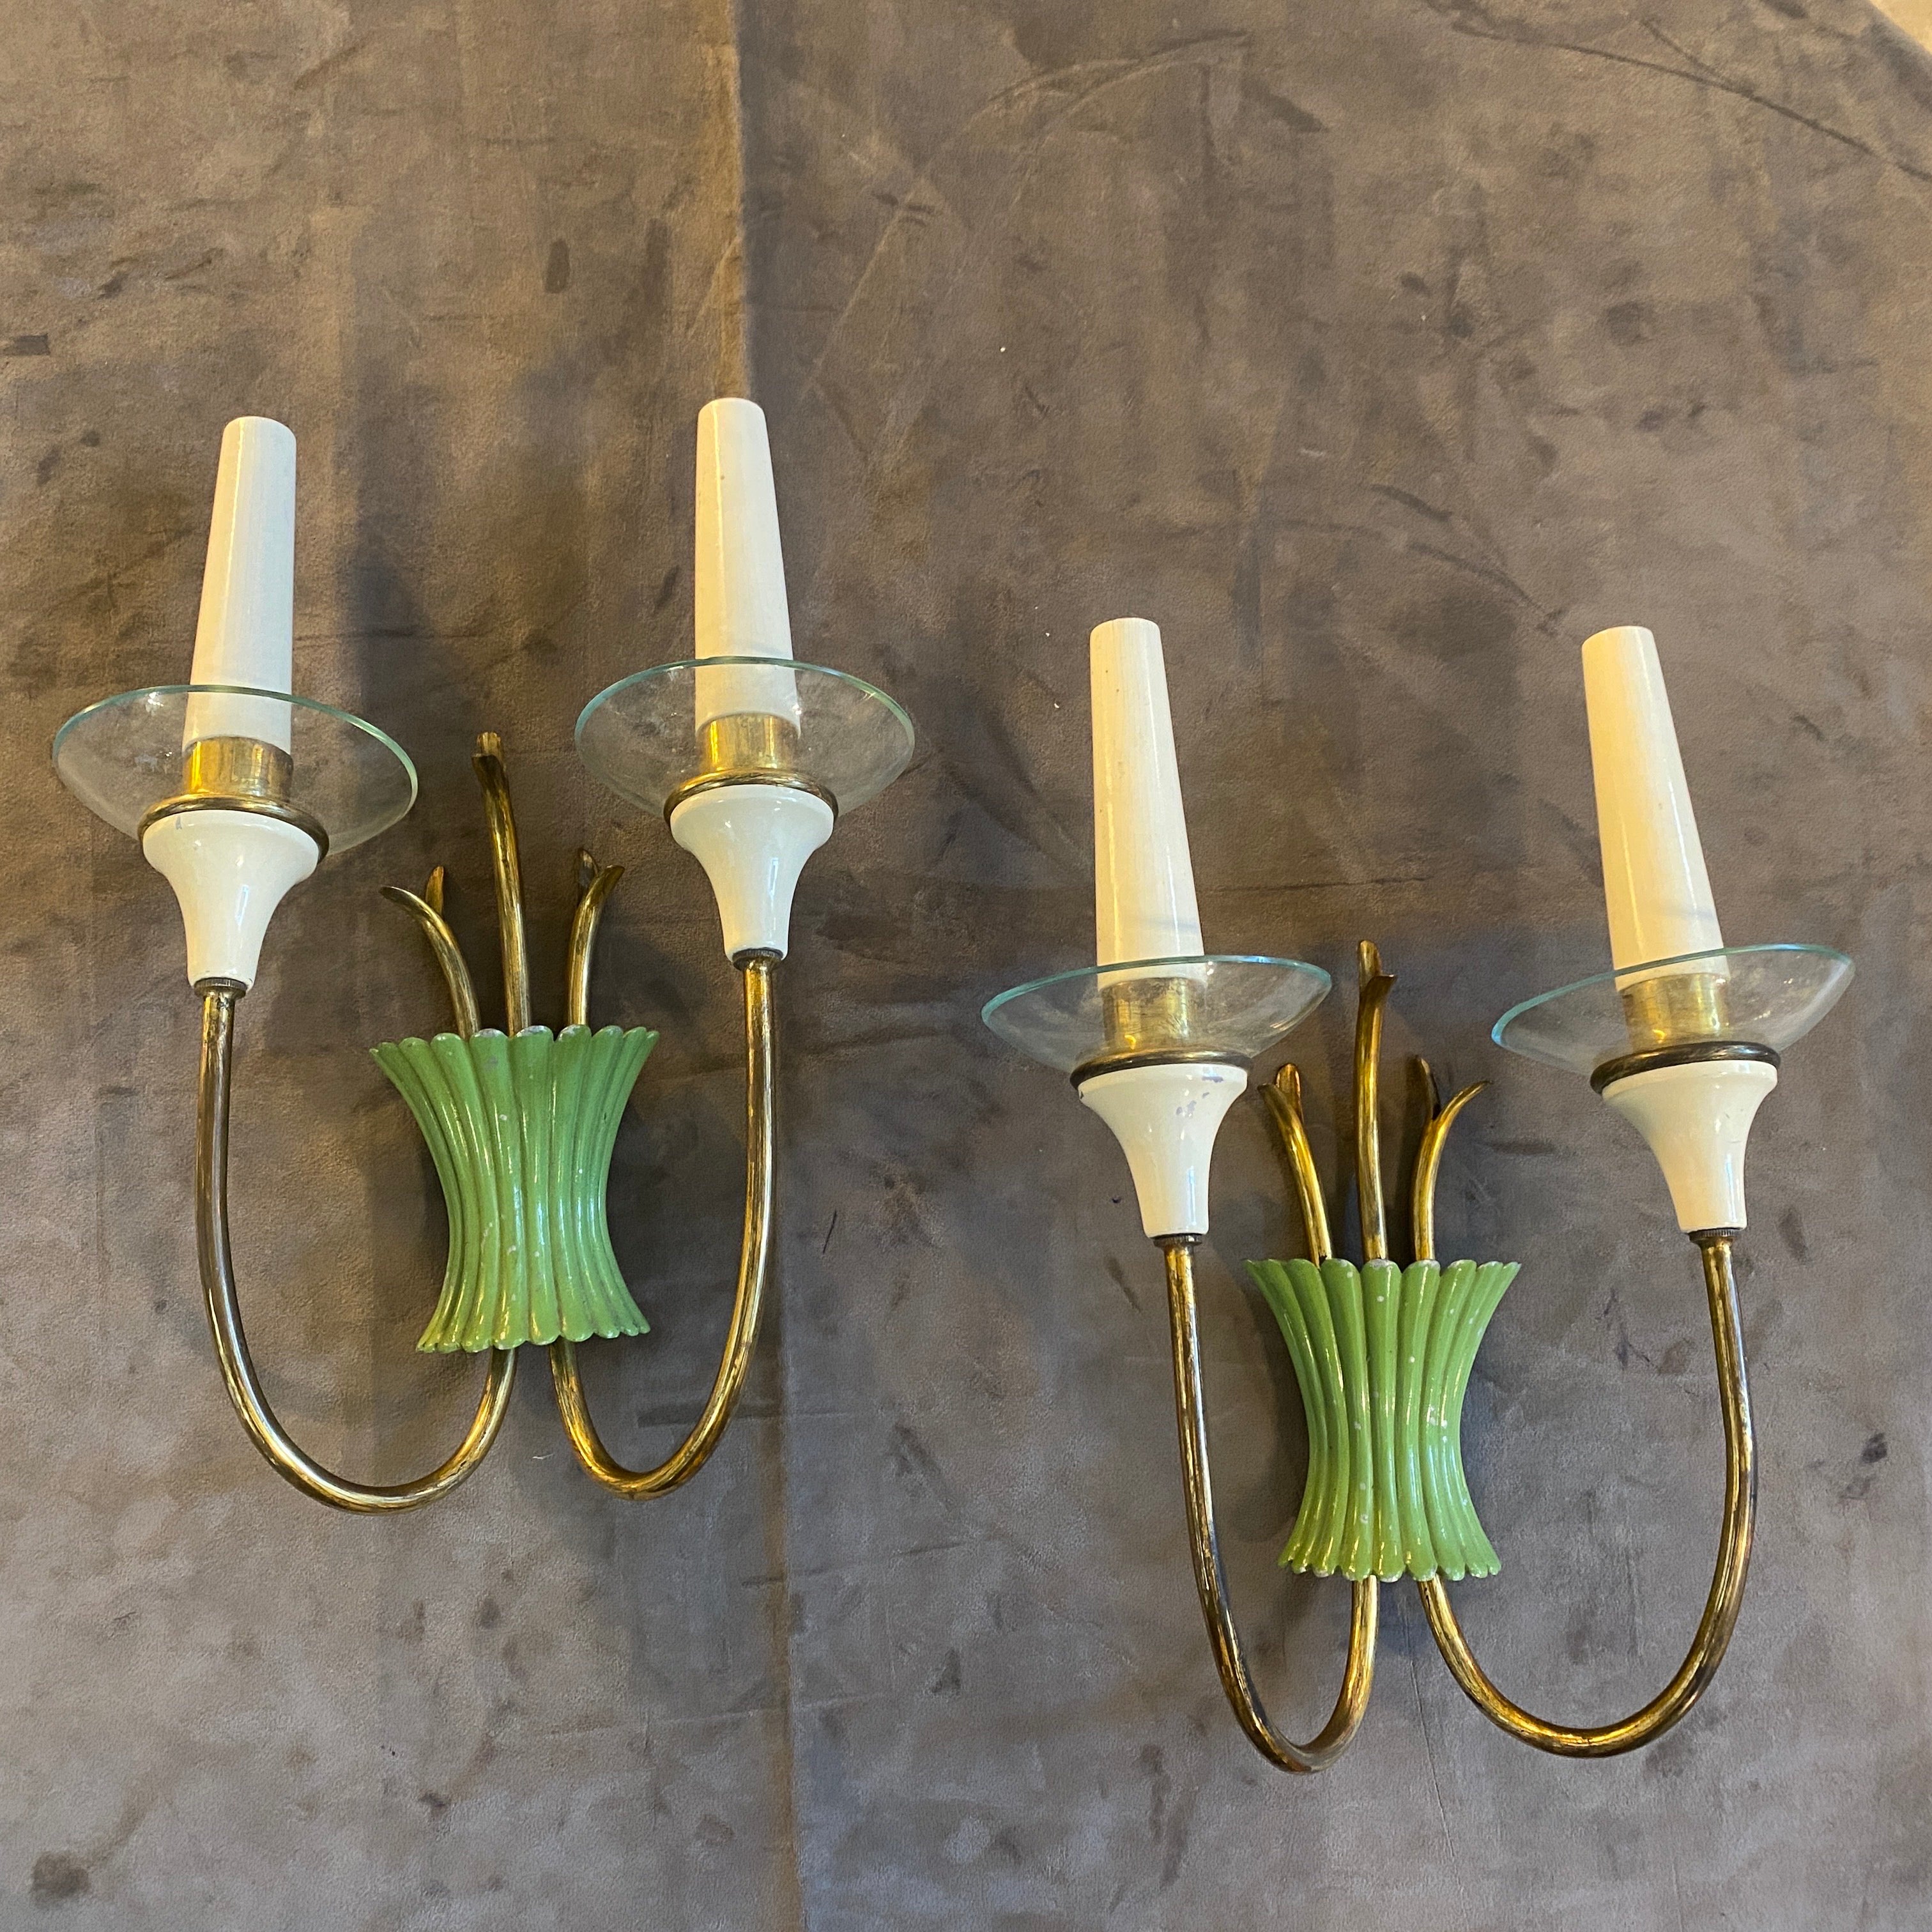 A pair of Mid-Century Modern brass, green painted metal, and glass two-light wall sconces, designed and manufactured in Italy in the fifties, are in working order and need two regular E14 bulbs for each sconce. These wall sconces are a type of